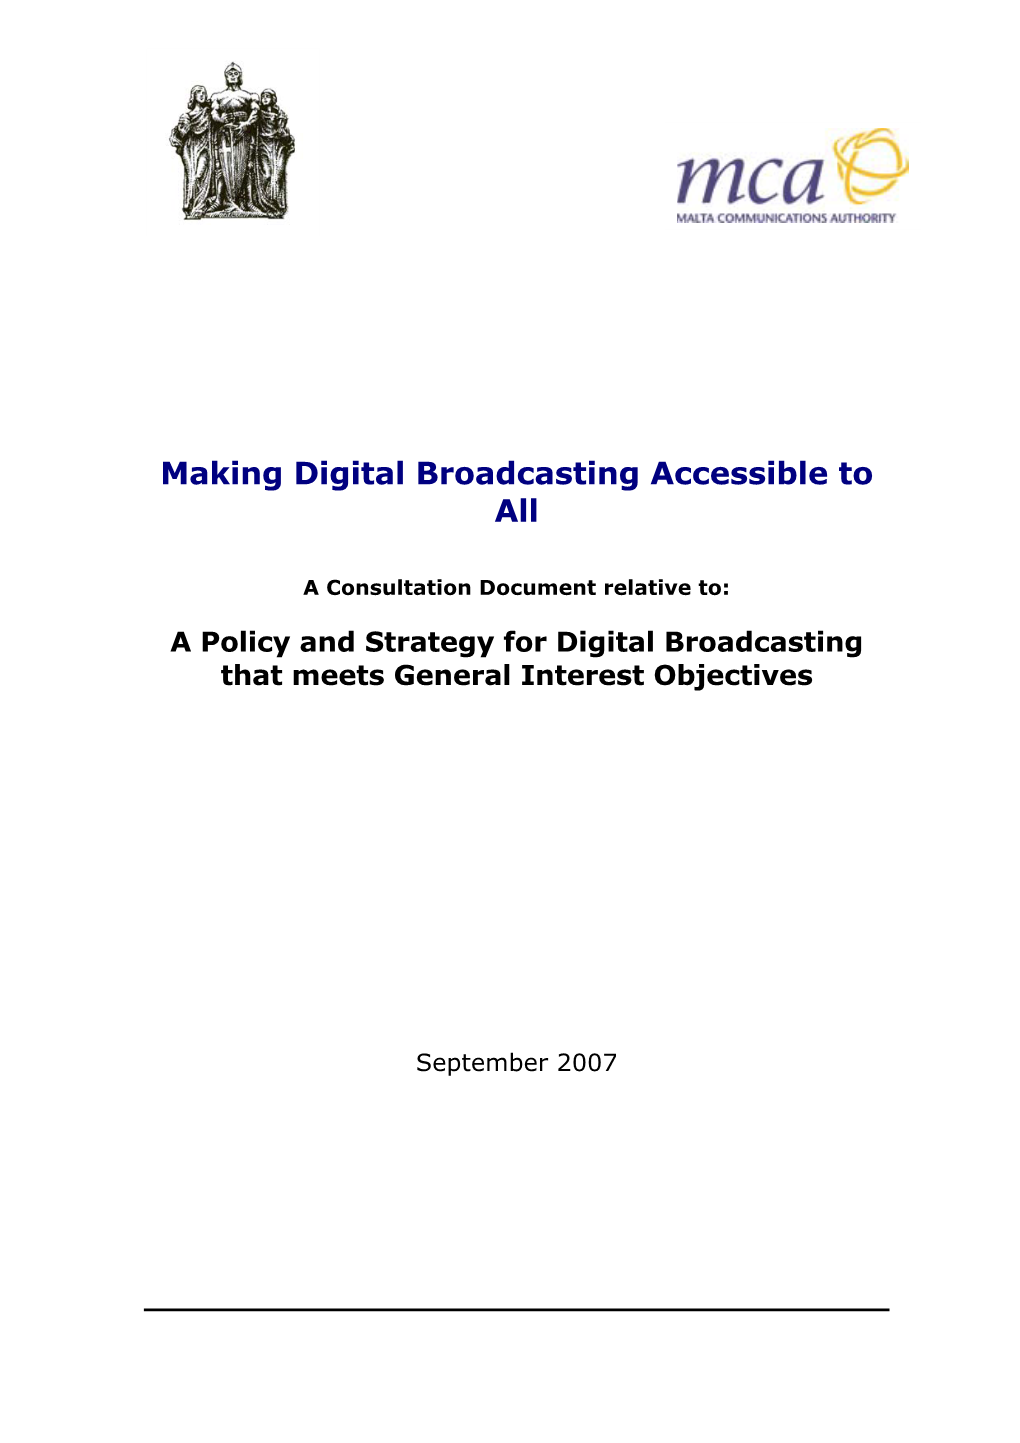 Making Digital Broadcasting Accessible to All